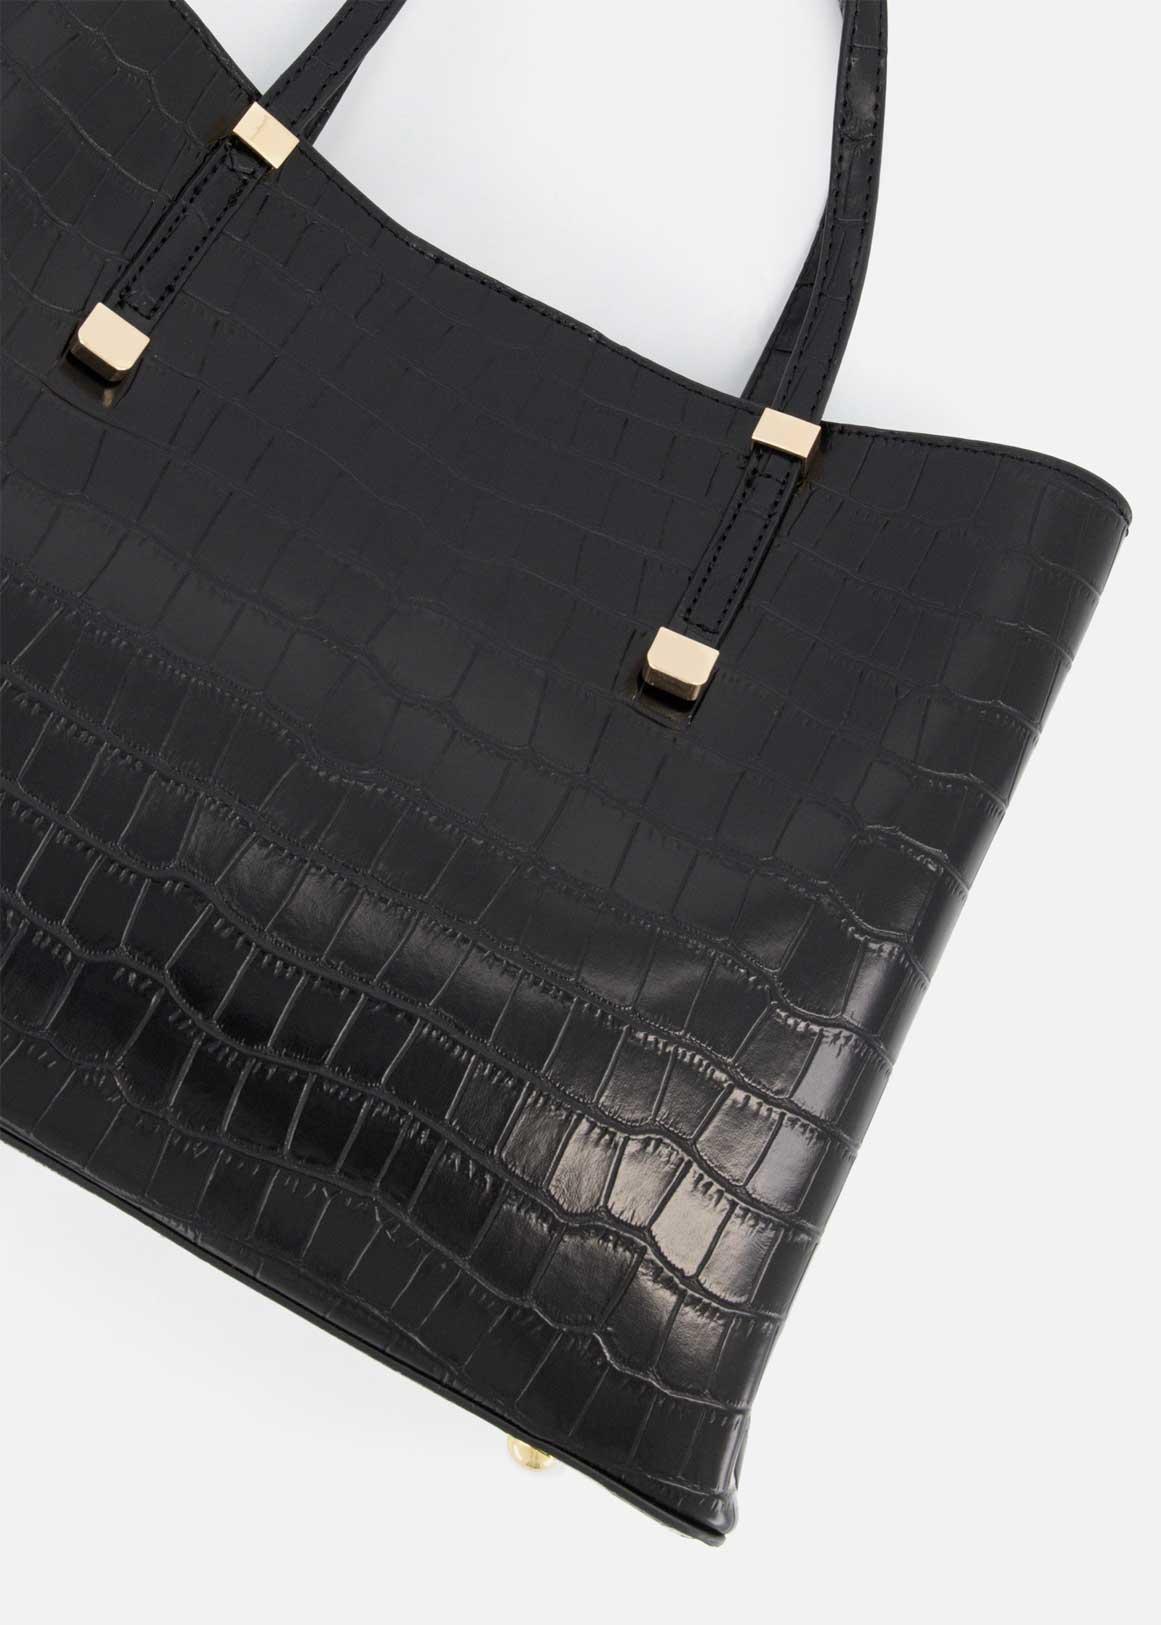 Vegan Designer Tom Ford Launches Cruelty-Free Crocodile Leather at